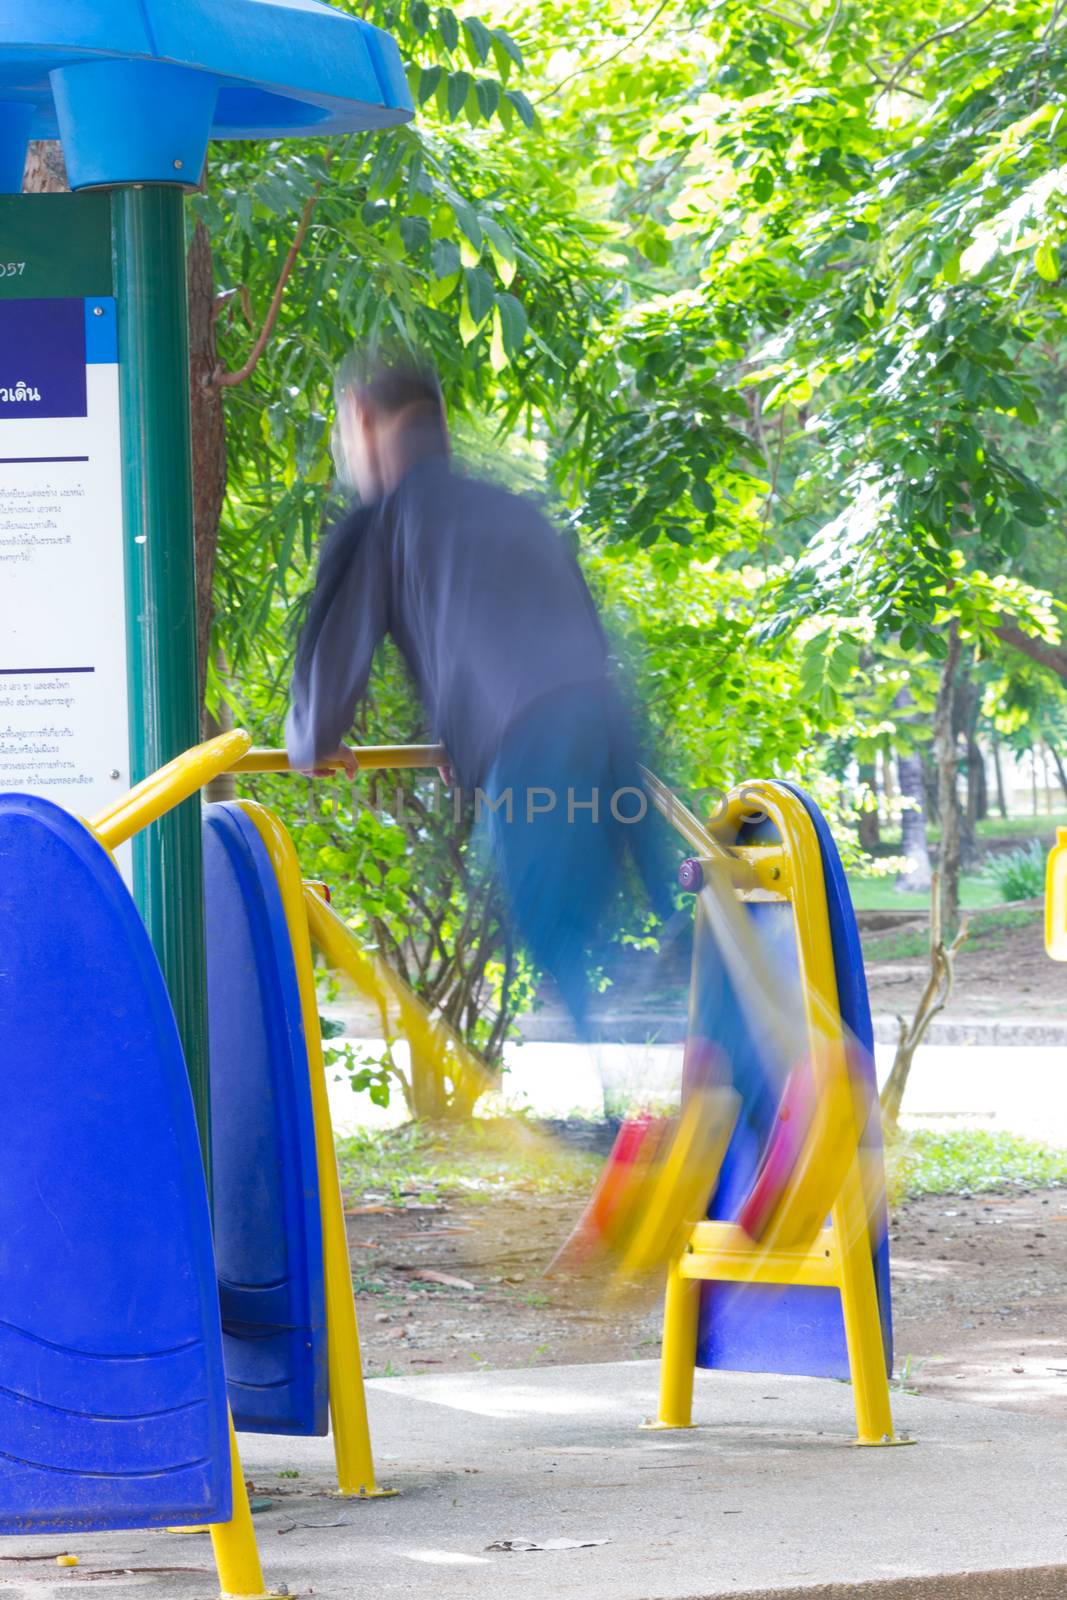 Blurred image of a man exercising on equipment in a park in Thailand (motion blur image)